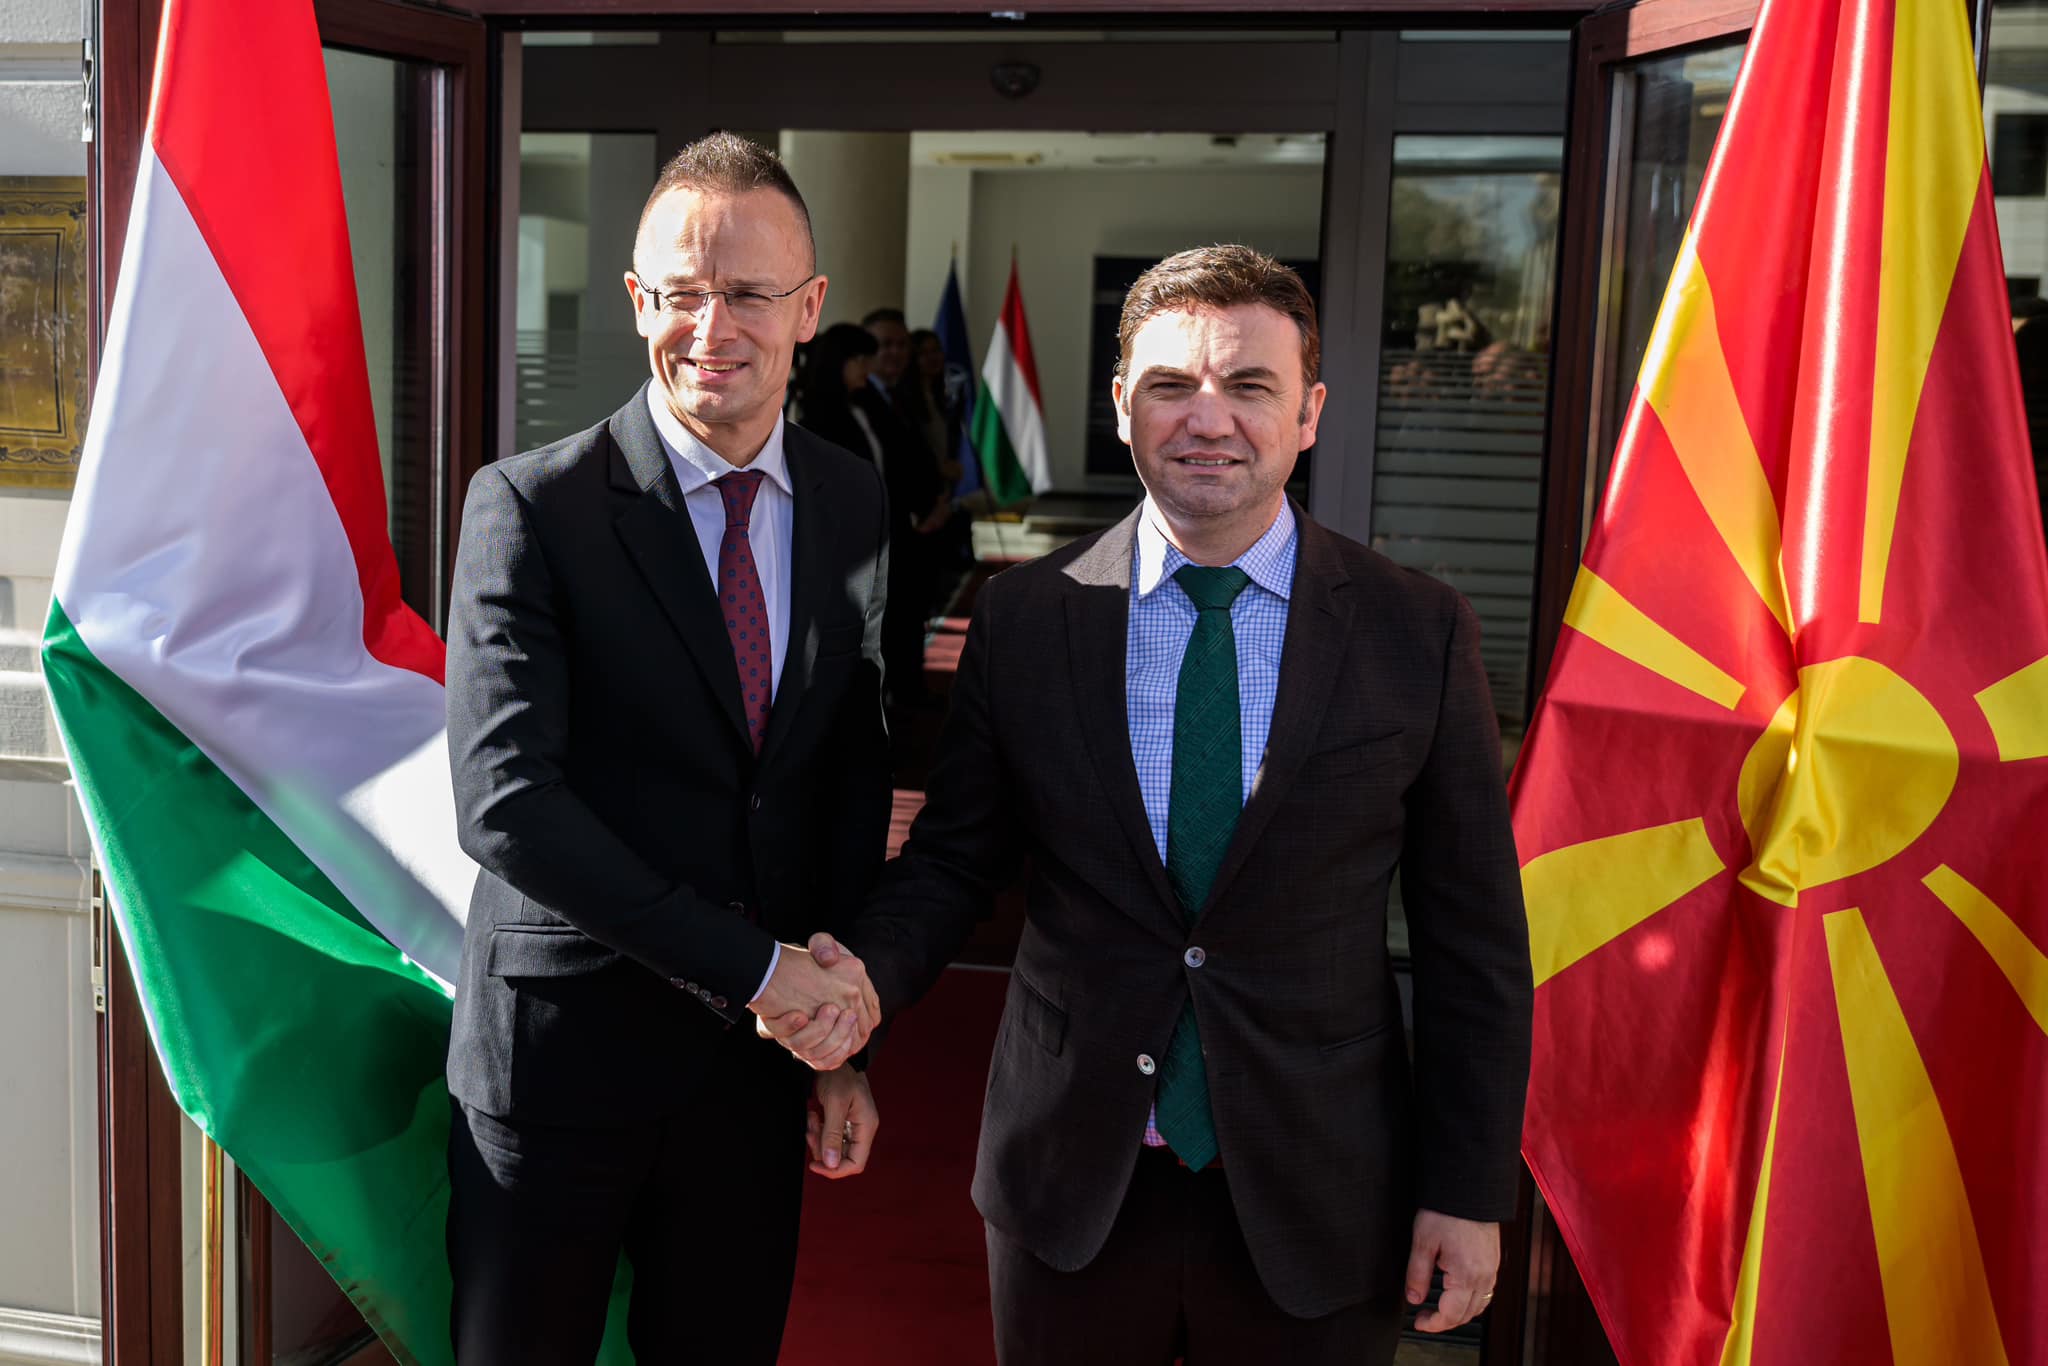 Accession of North Macedonia to the EU a Key Issue